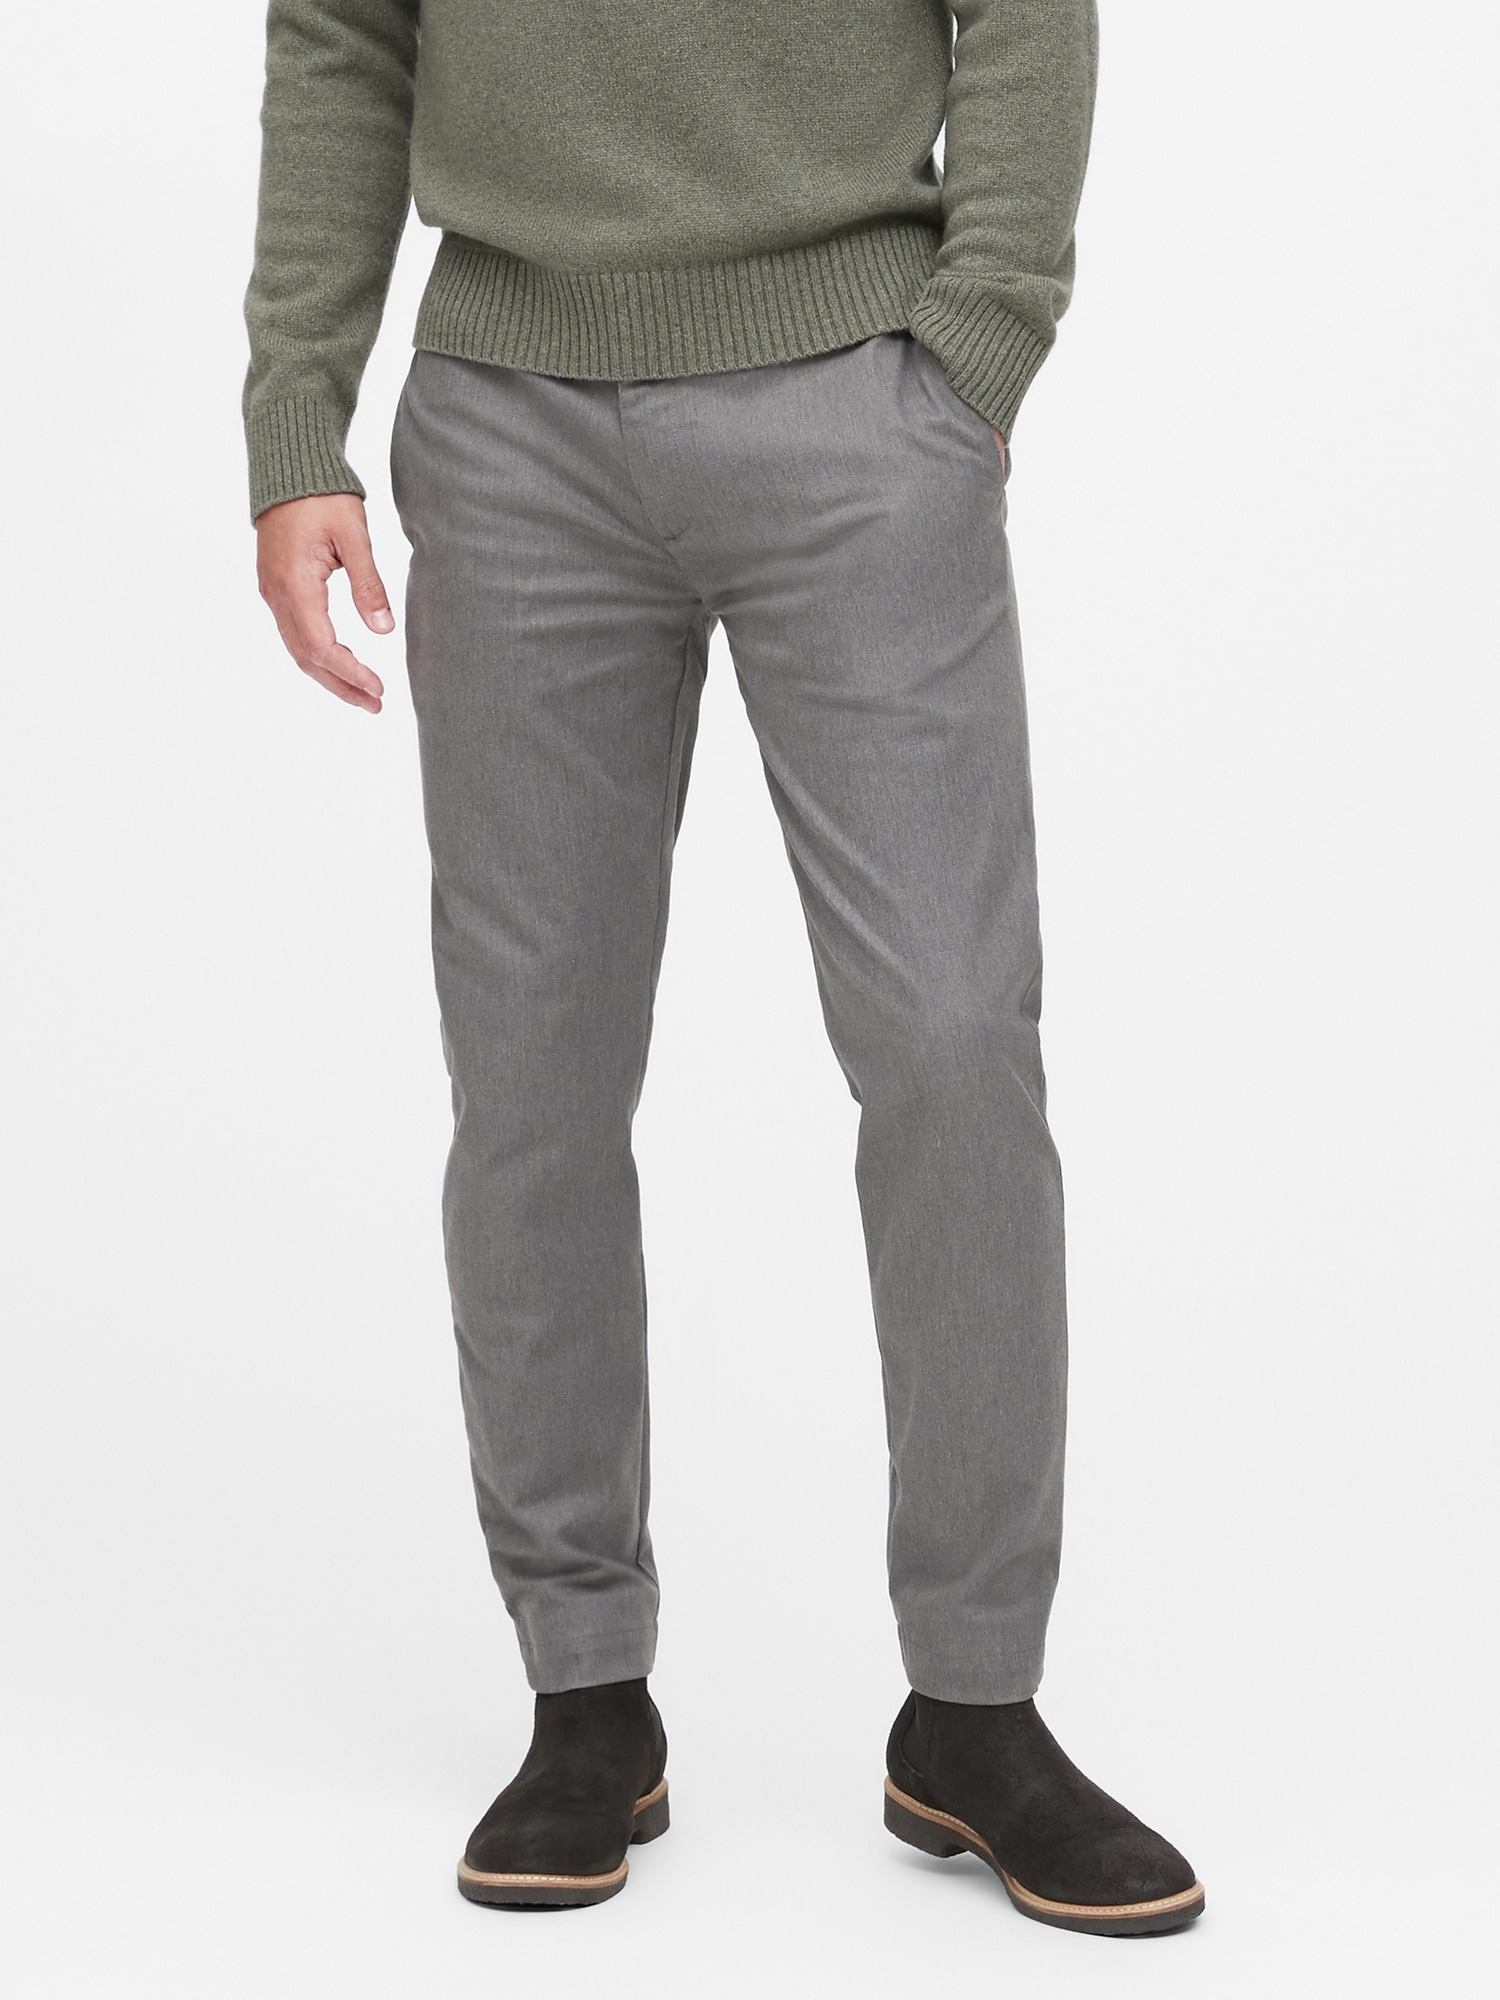 athletic tapered pants